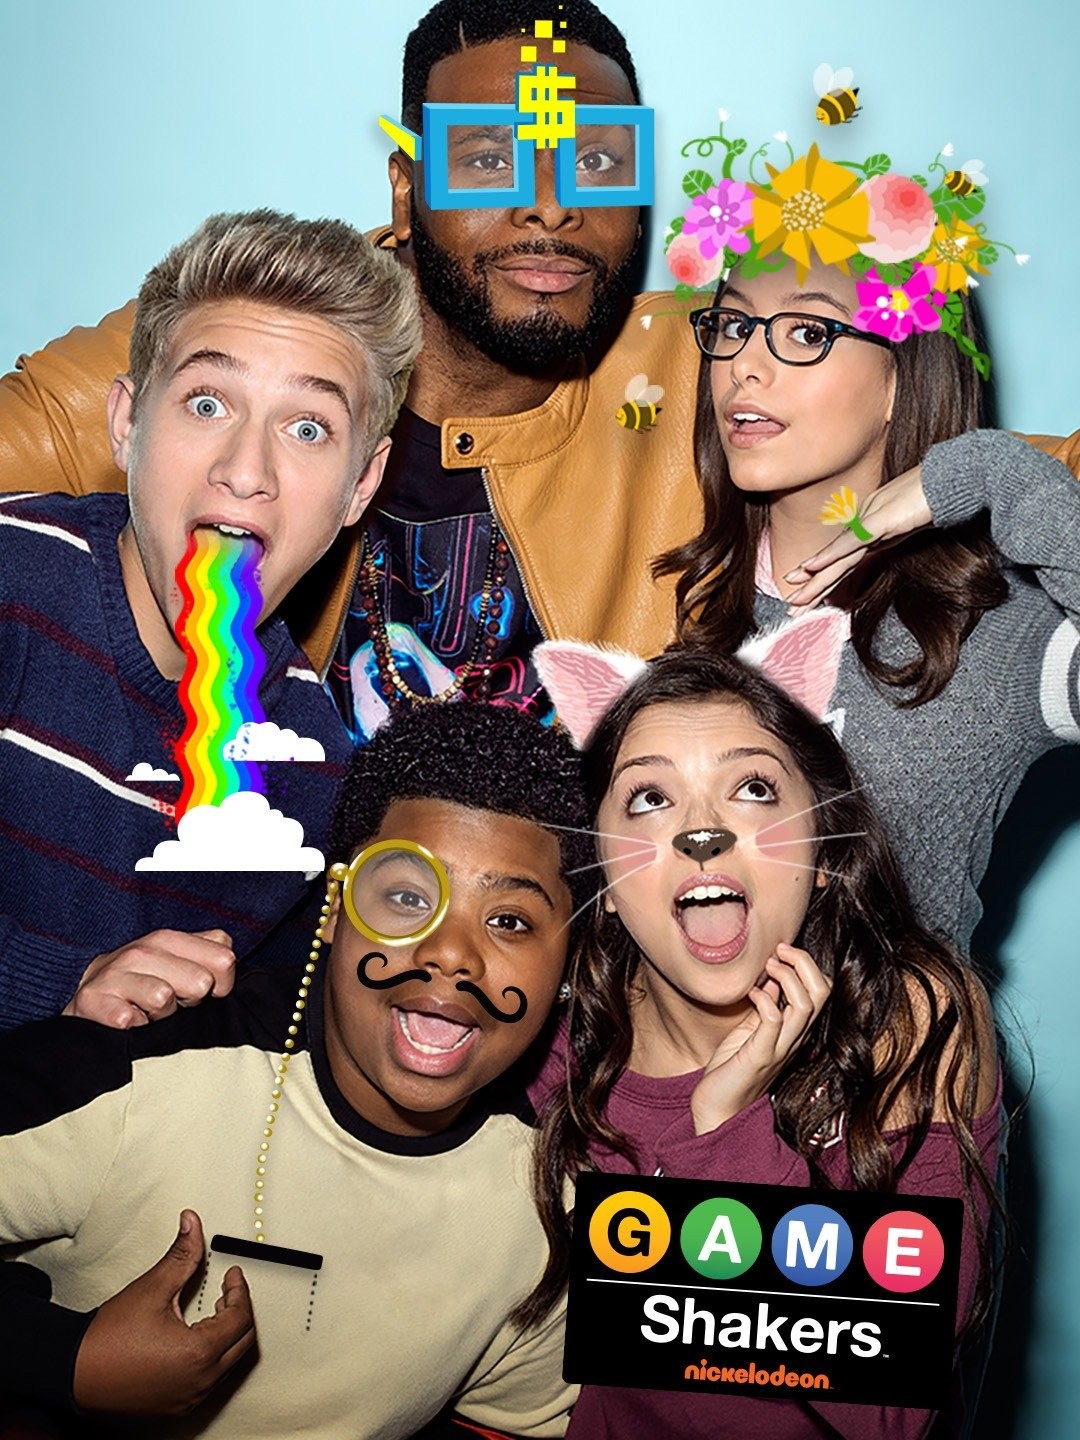 Game Shakers: Hilarious World of Gaming and Friendship - UpNext by